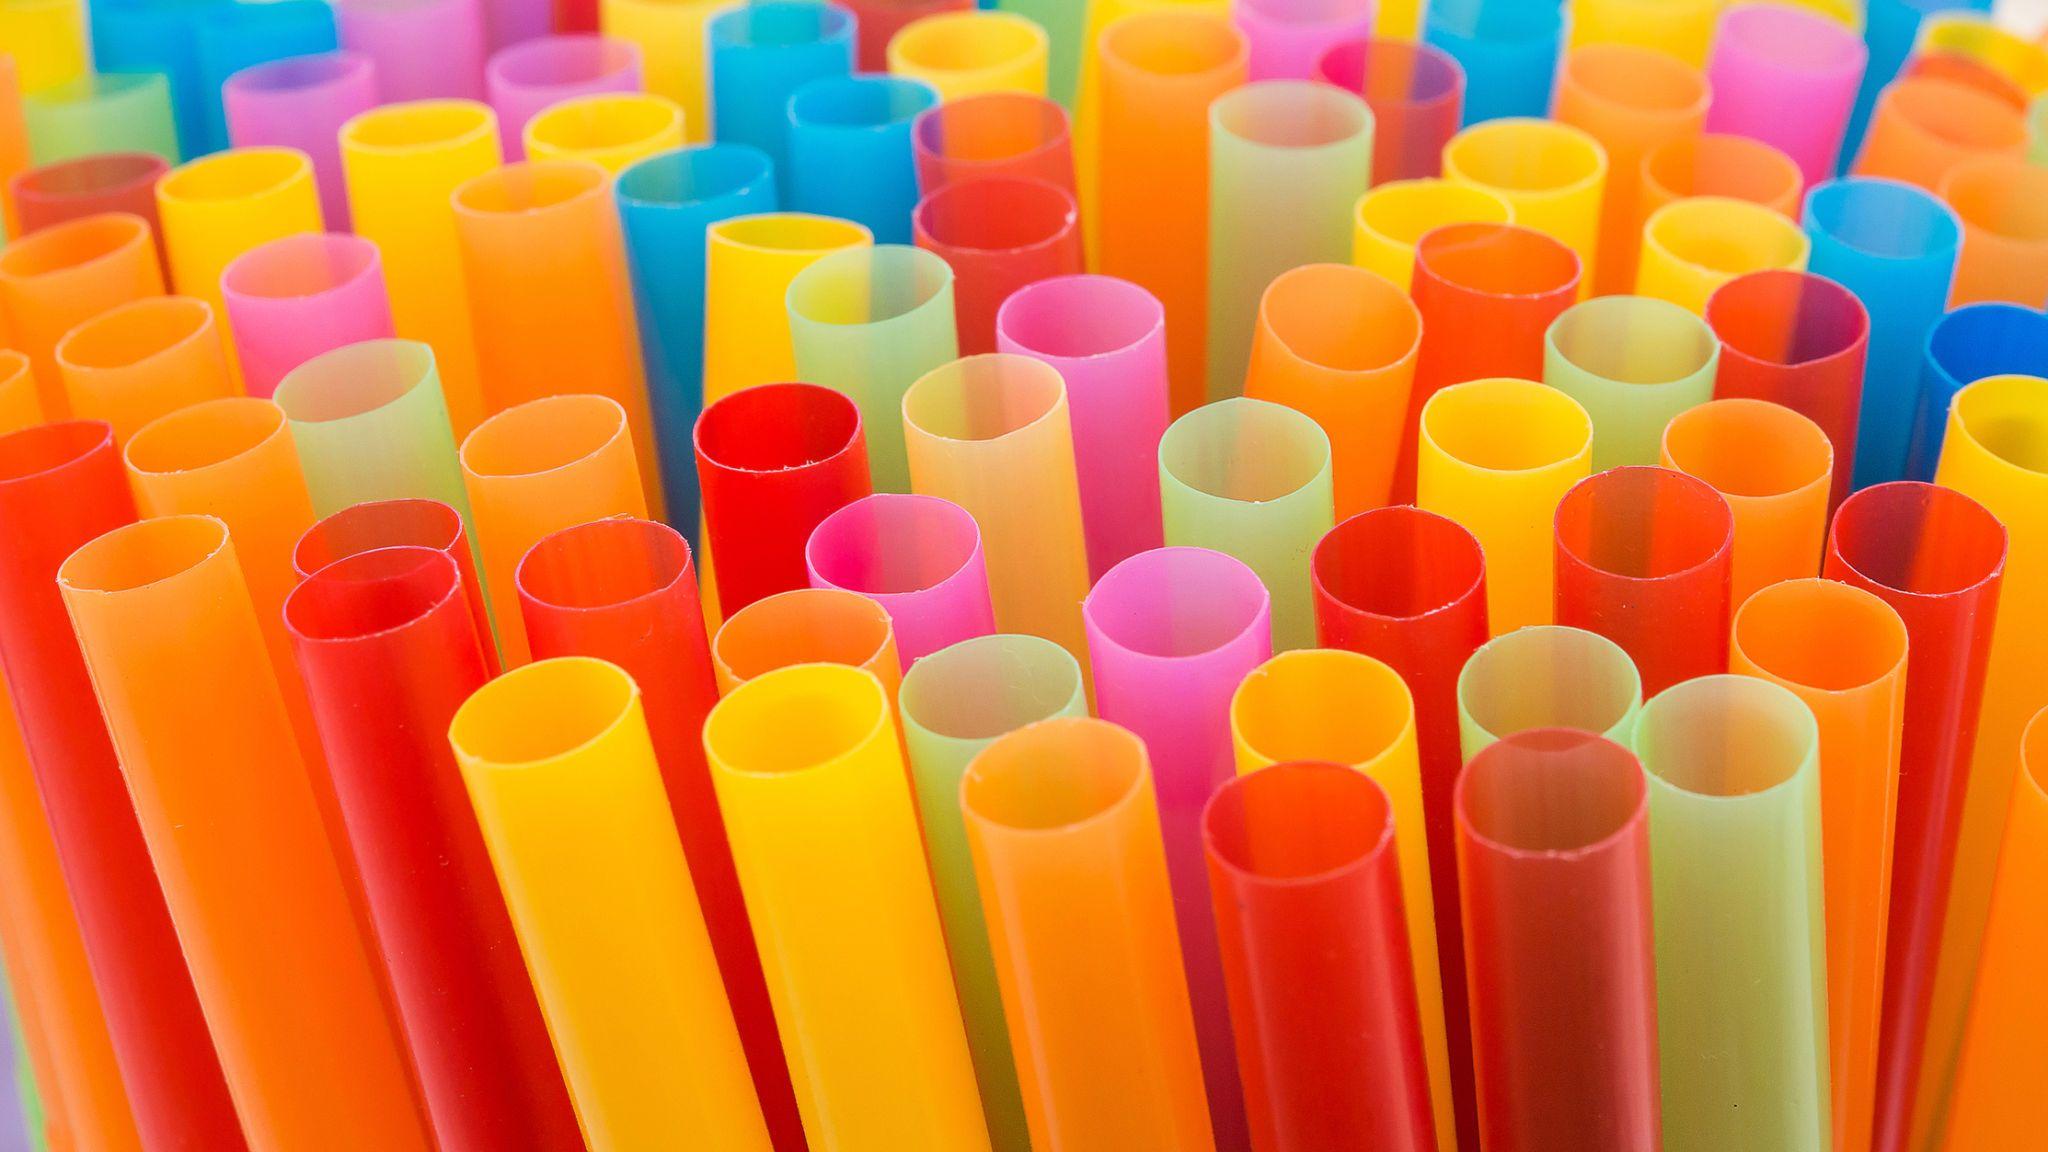 Ban on plastic straws being considered, Environment